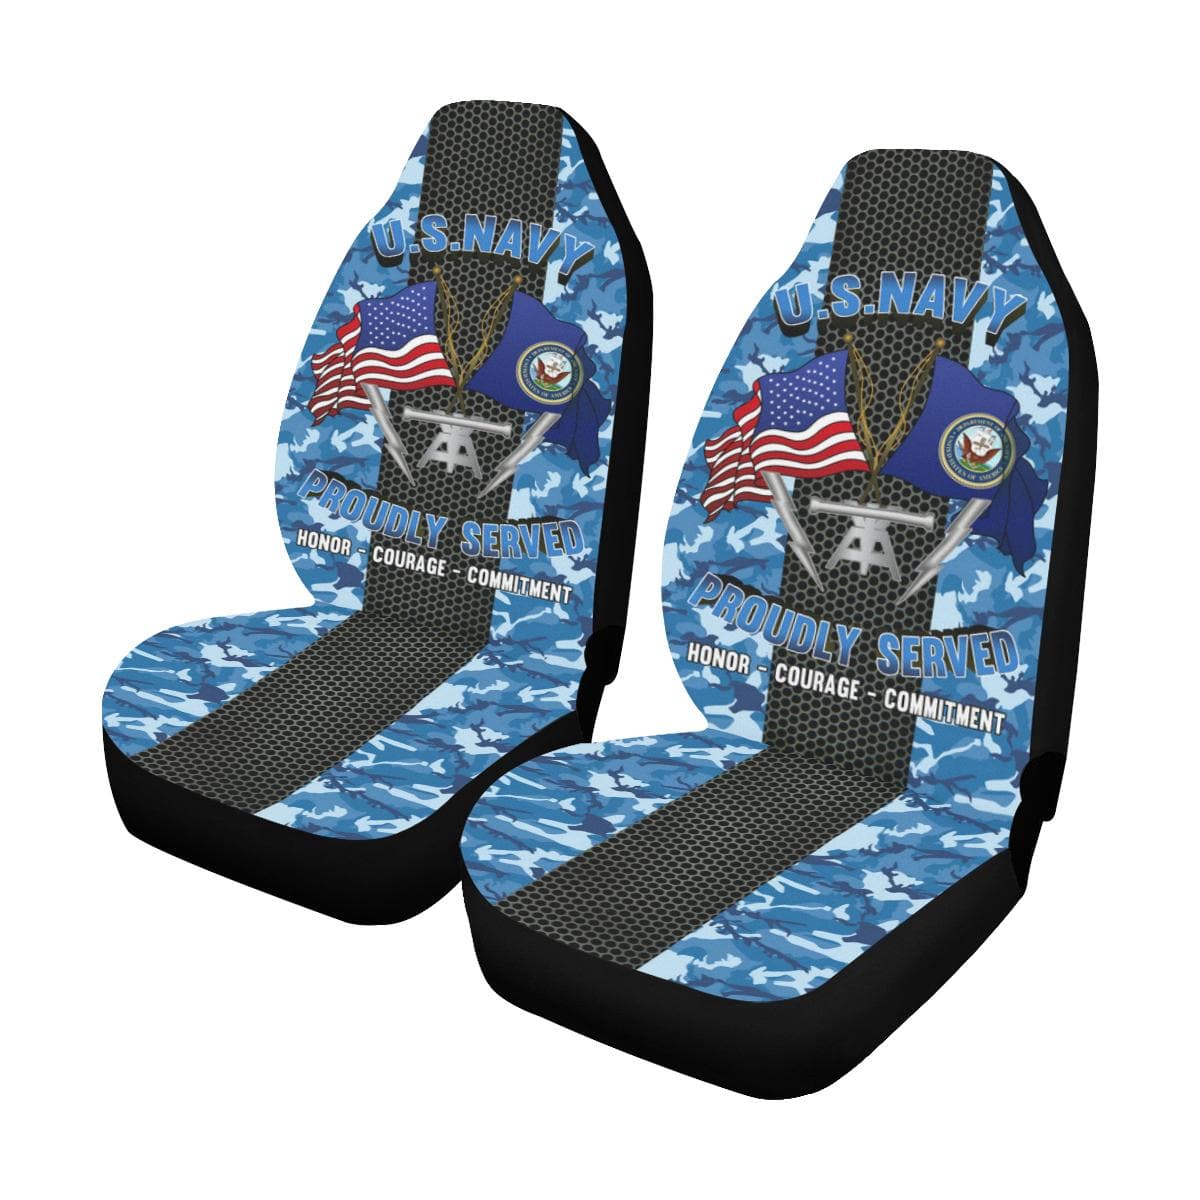 Navy Fire Controlman Navy FC Car Seat Covers (Set of 2)-SeatCovers-Navy-Rate-Veterans Nation